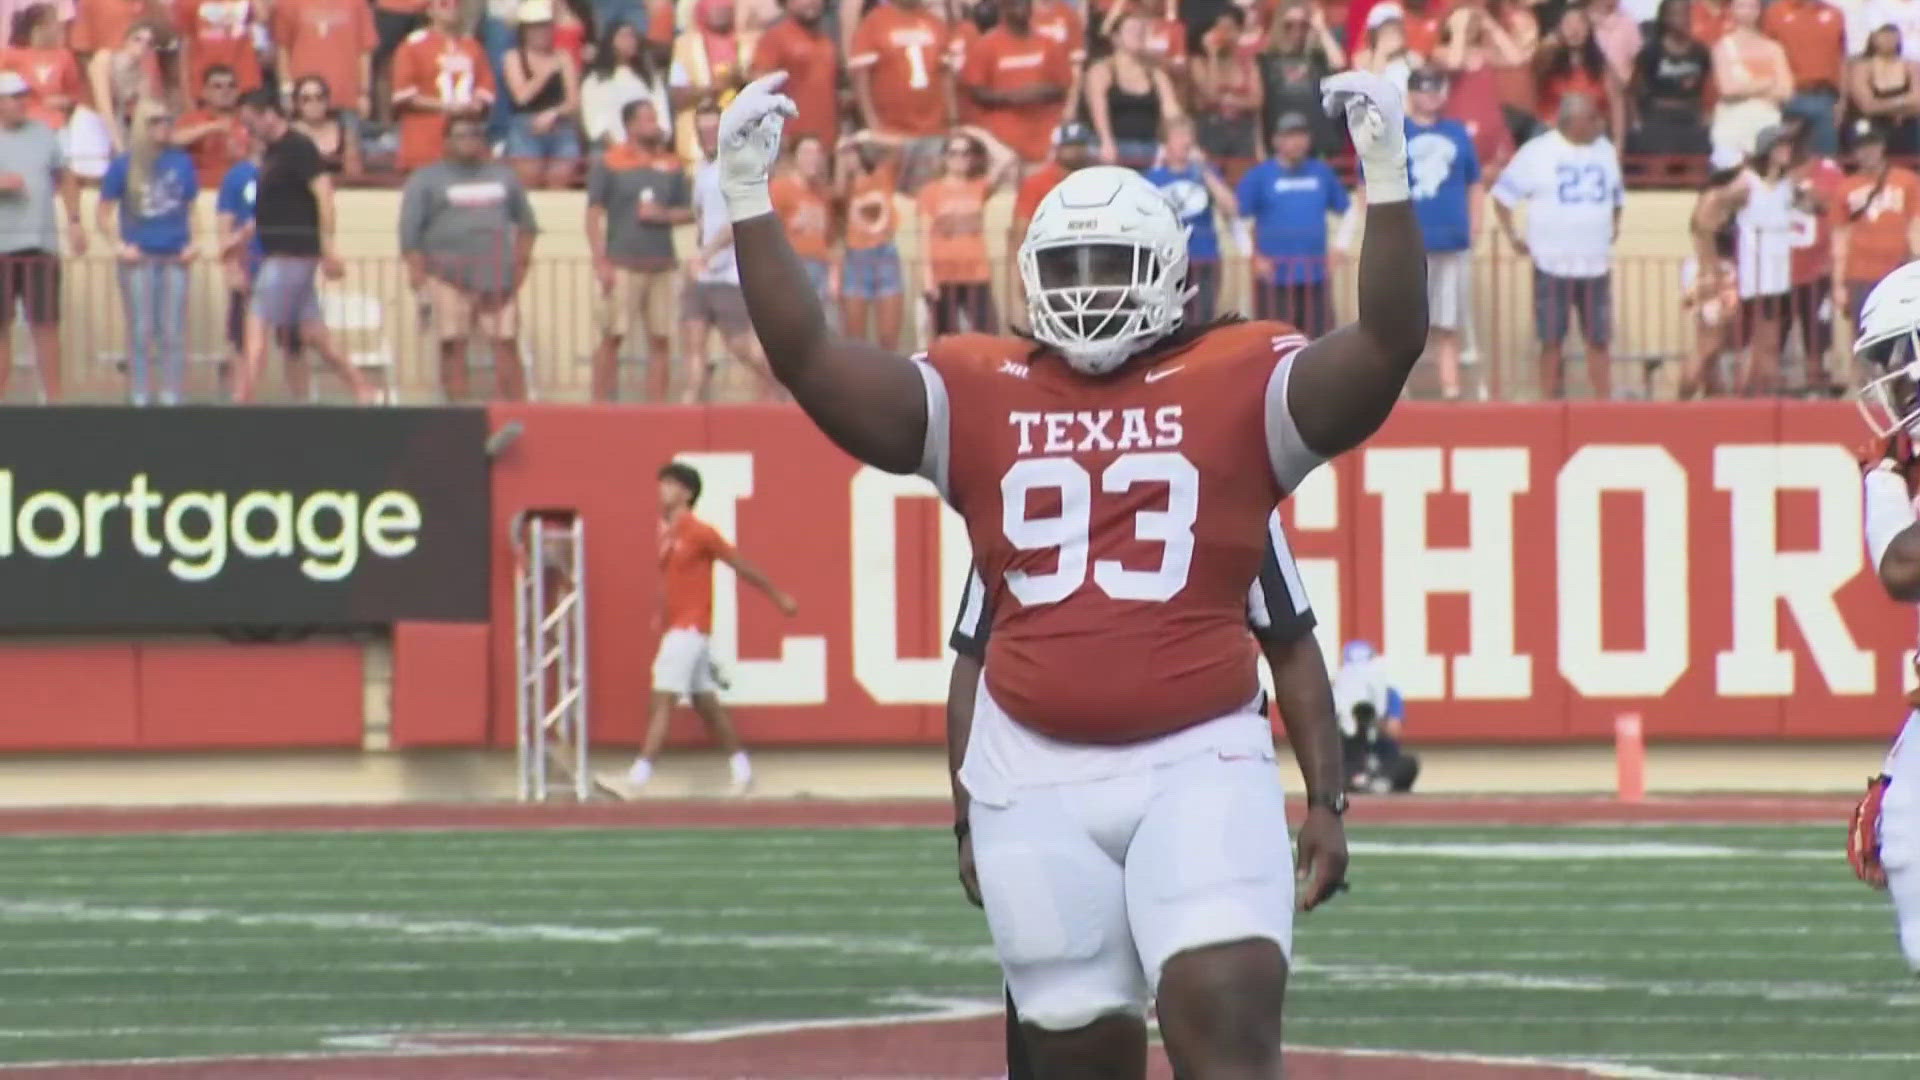 The Huntsville native was chosen as the 38th pick in the draft, having won the Outland Trophy this year, given to the best interior lineman in the country.